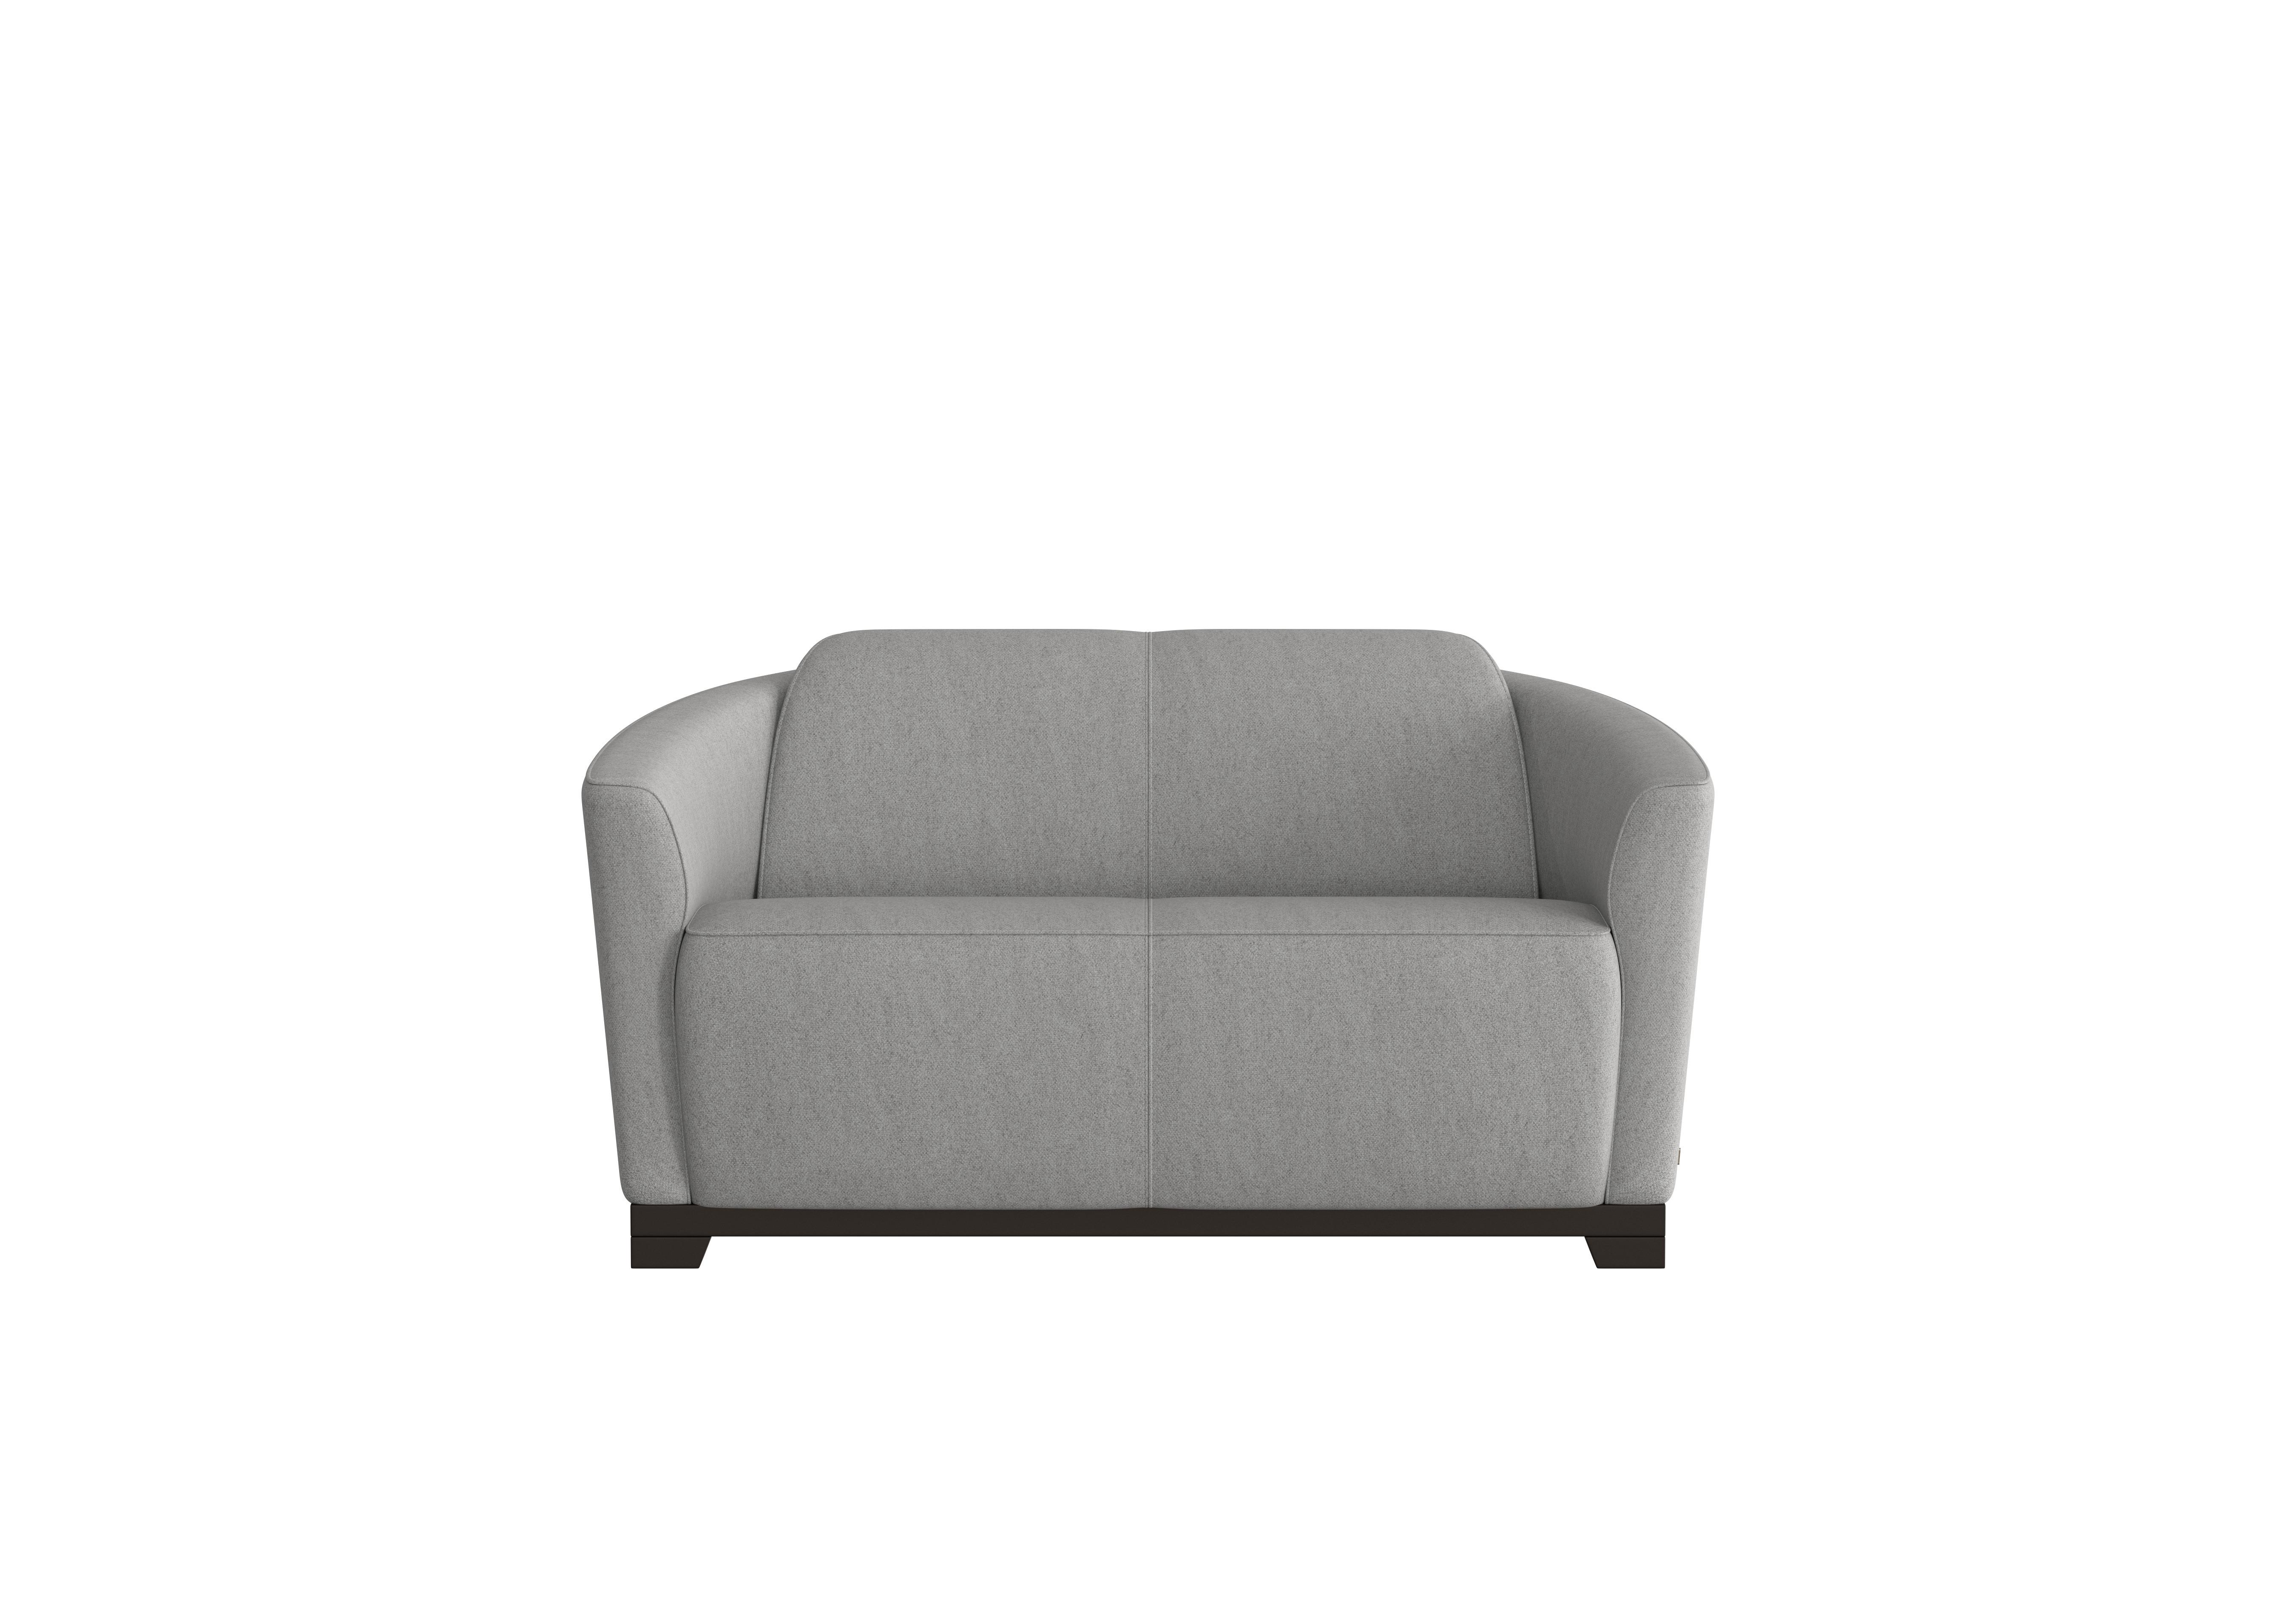 Ketty 2 Seater Fabric Sofa in Fuente Ash on Furniture Village